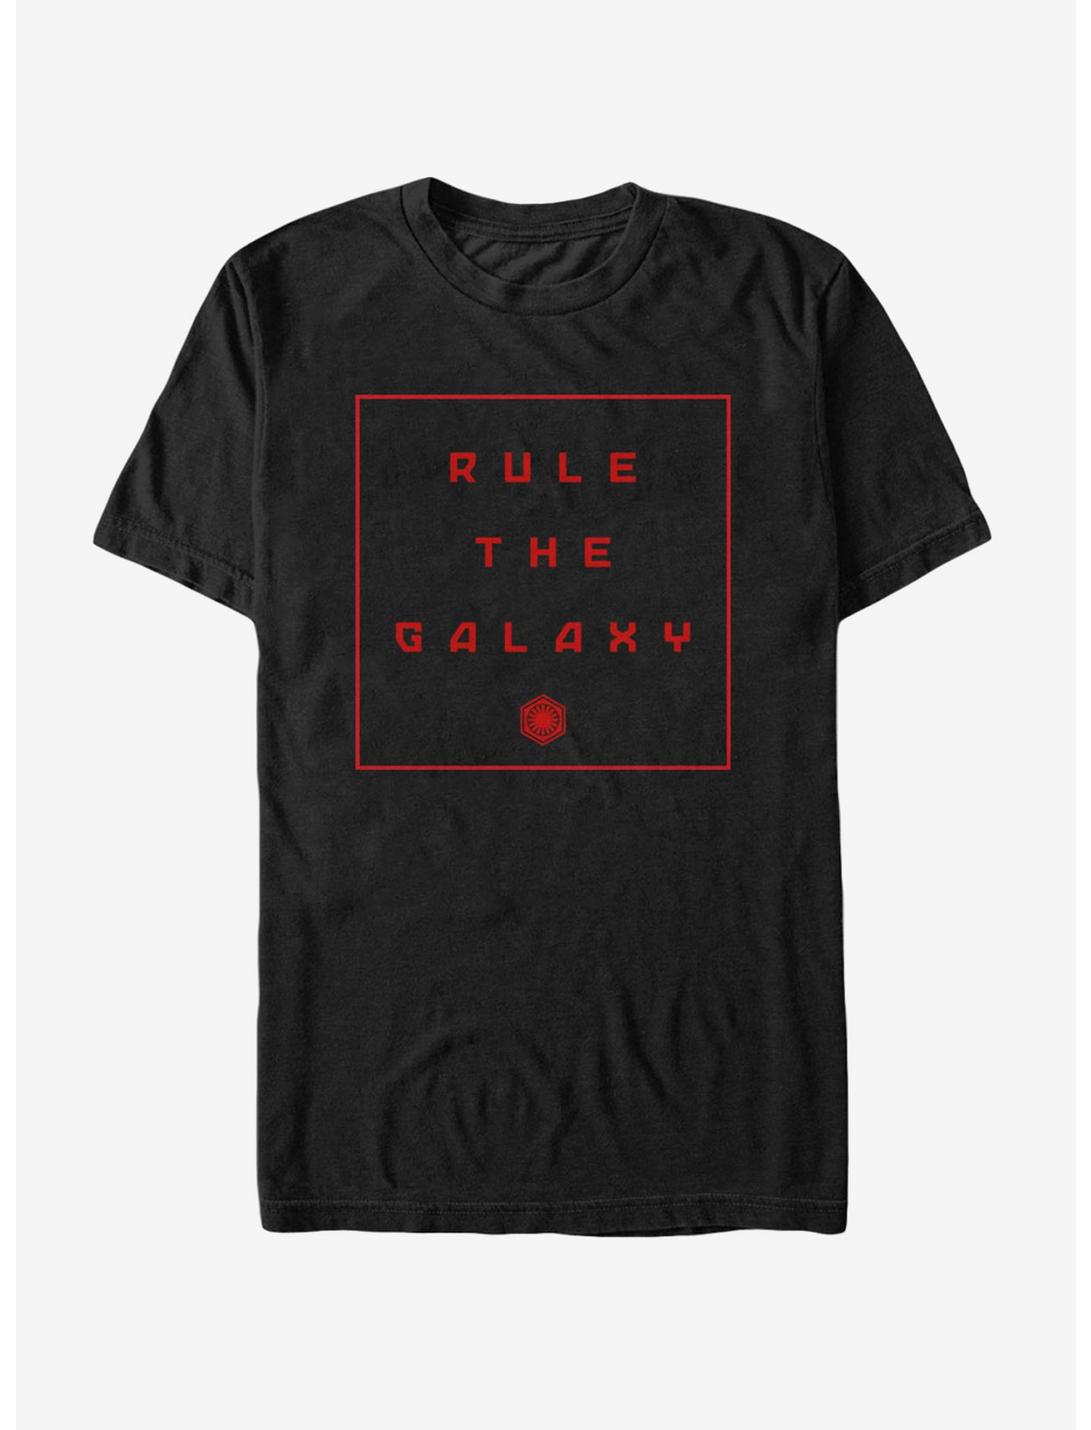 Star Wars Episode VII The Force Awakens Rule the Galaxy T-Shirt, BLACK, hi-res